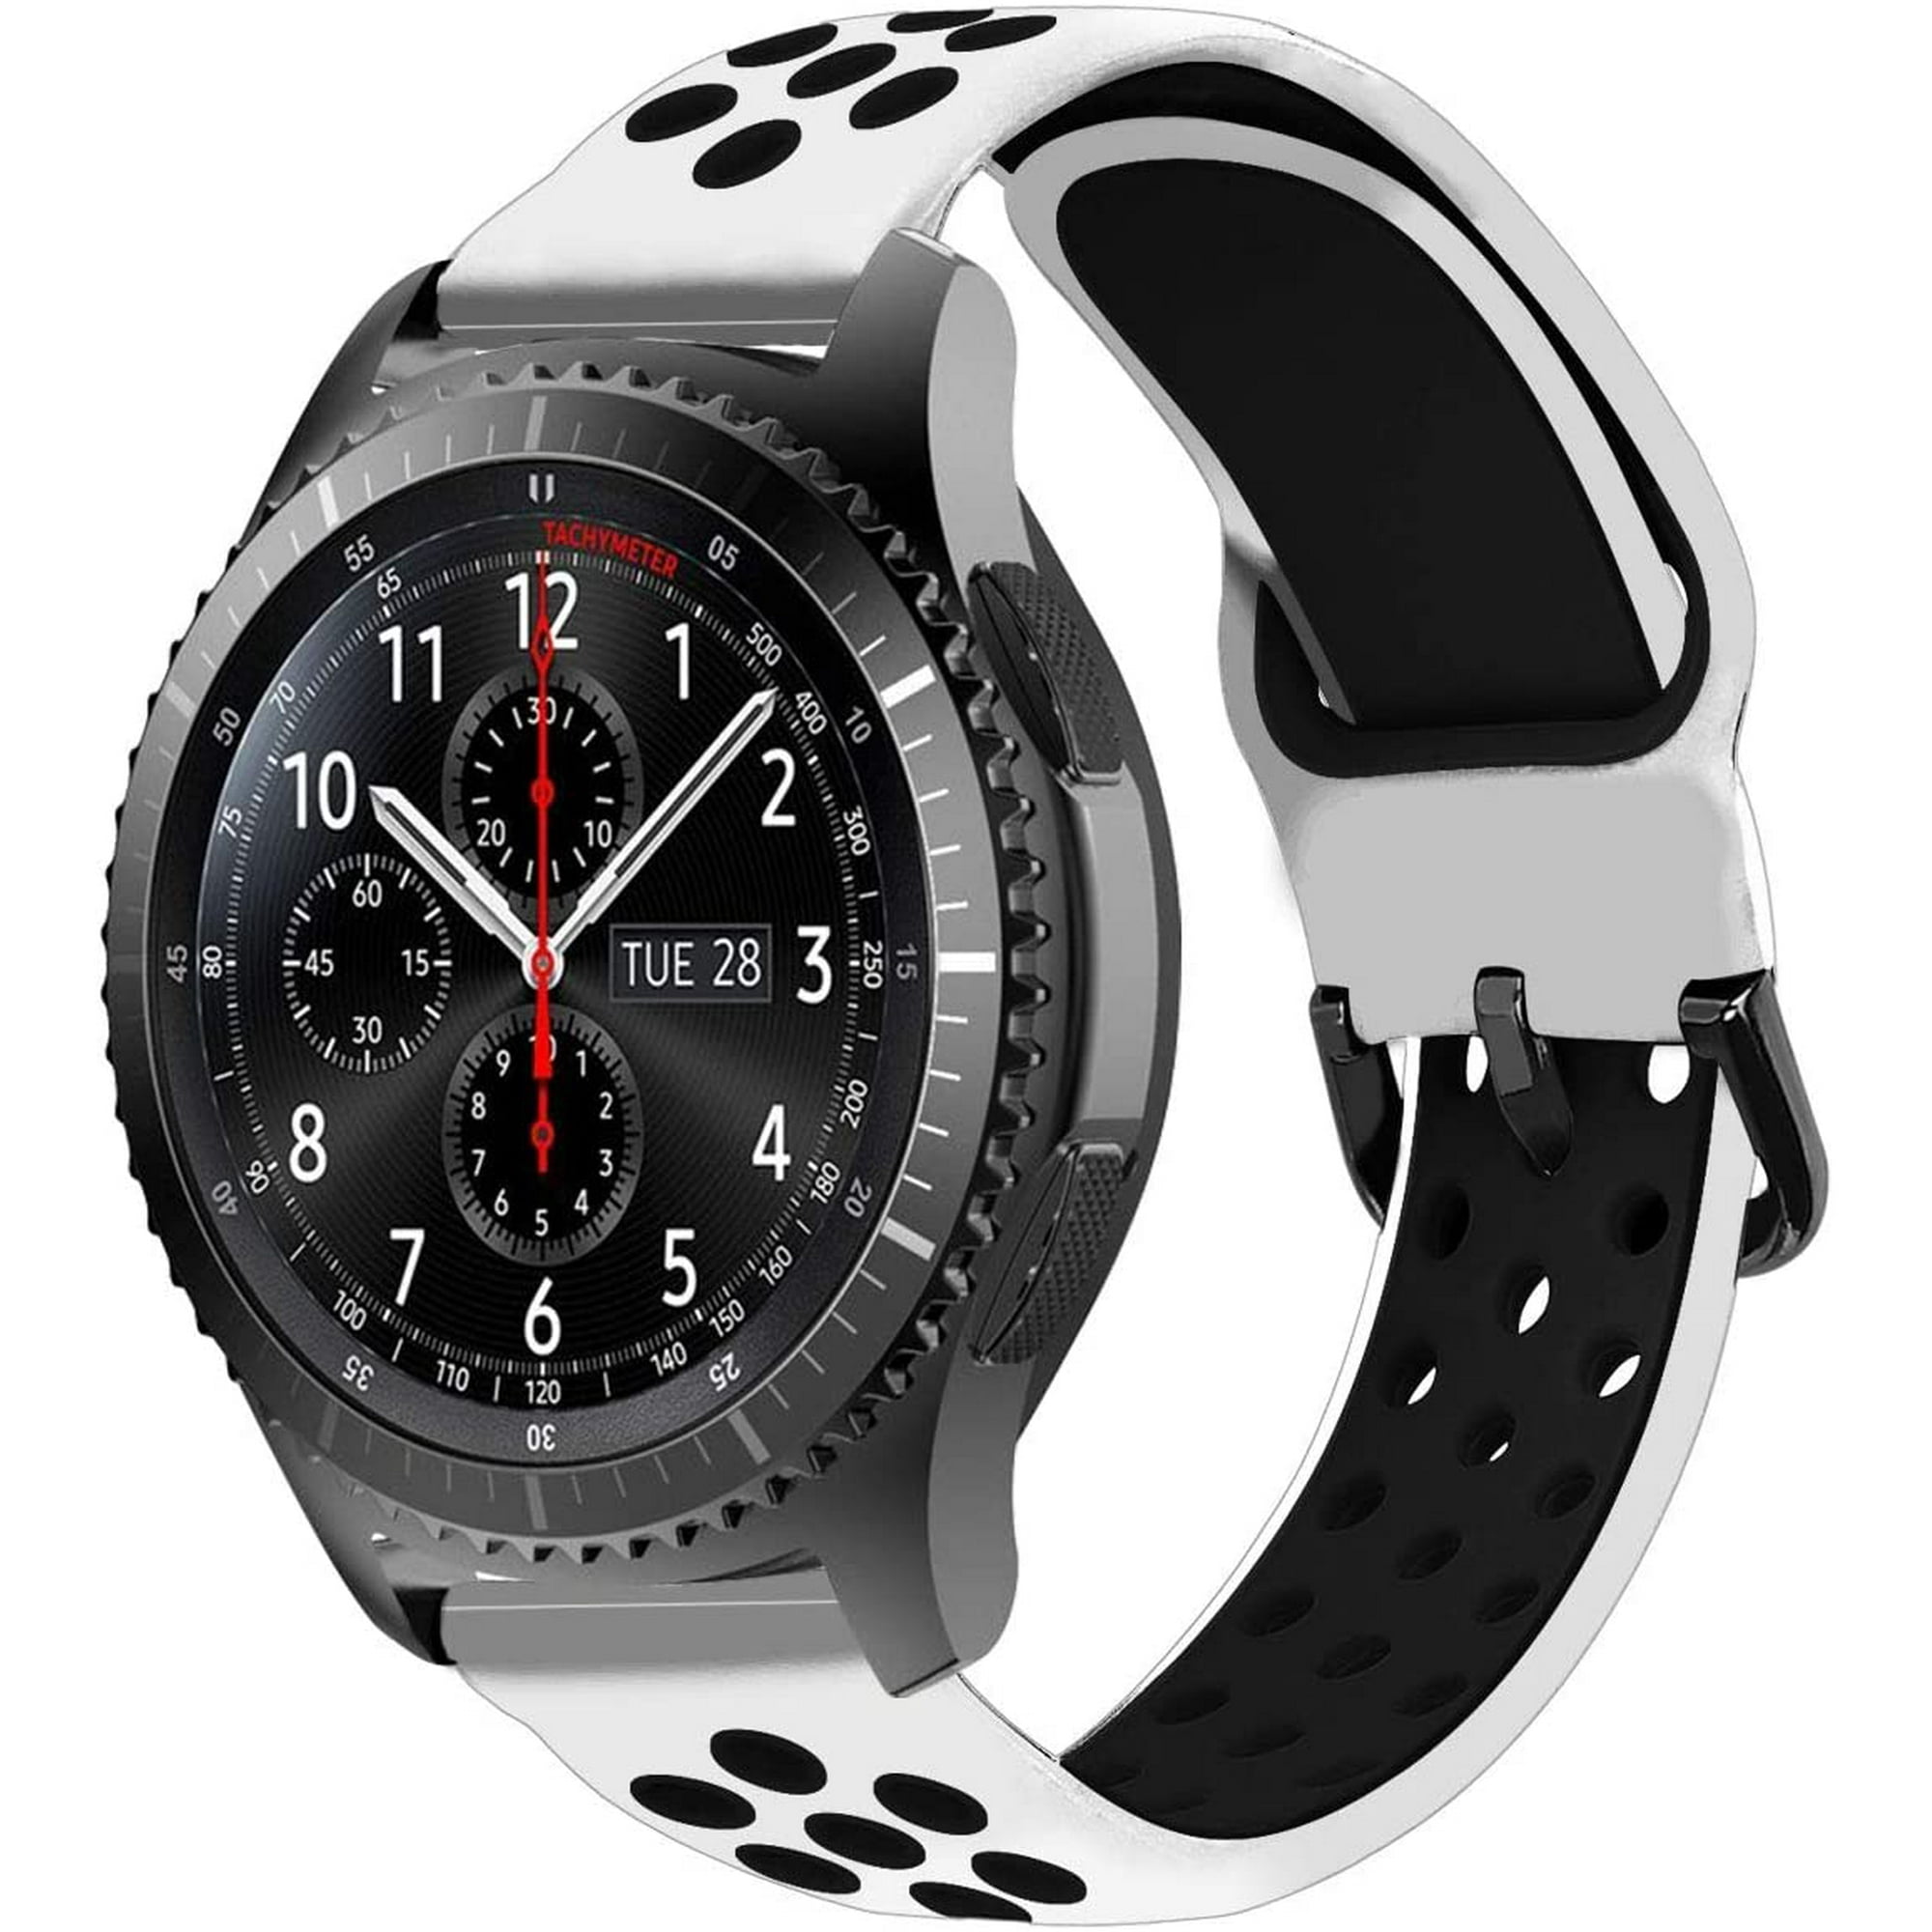 Clam bad zadel MroTech 22MM Strap Compatible with Samsung Galaxy Watch 46mm/Gear S3 Classic/Frontier  Silicone Rubber Quick Release | Walmart Canada